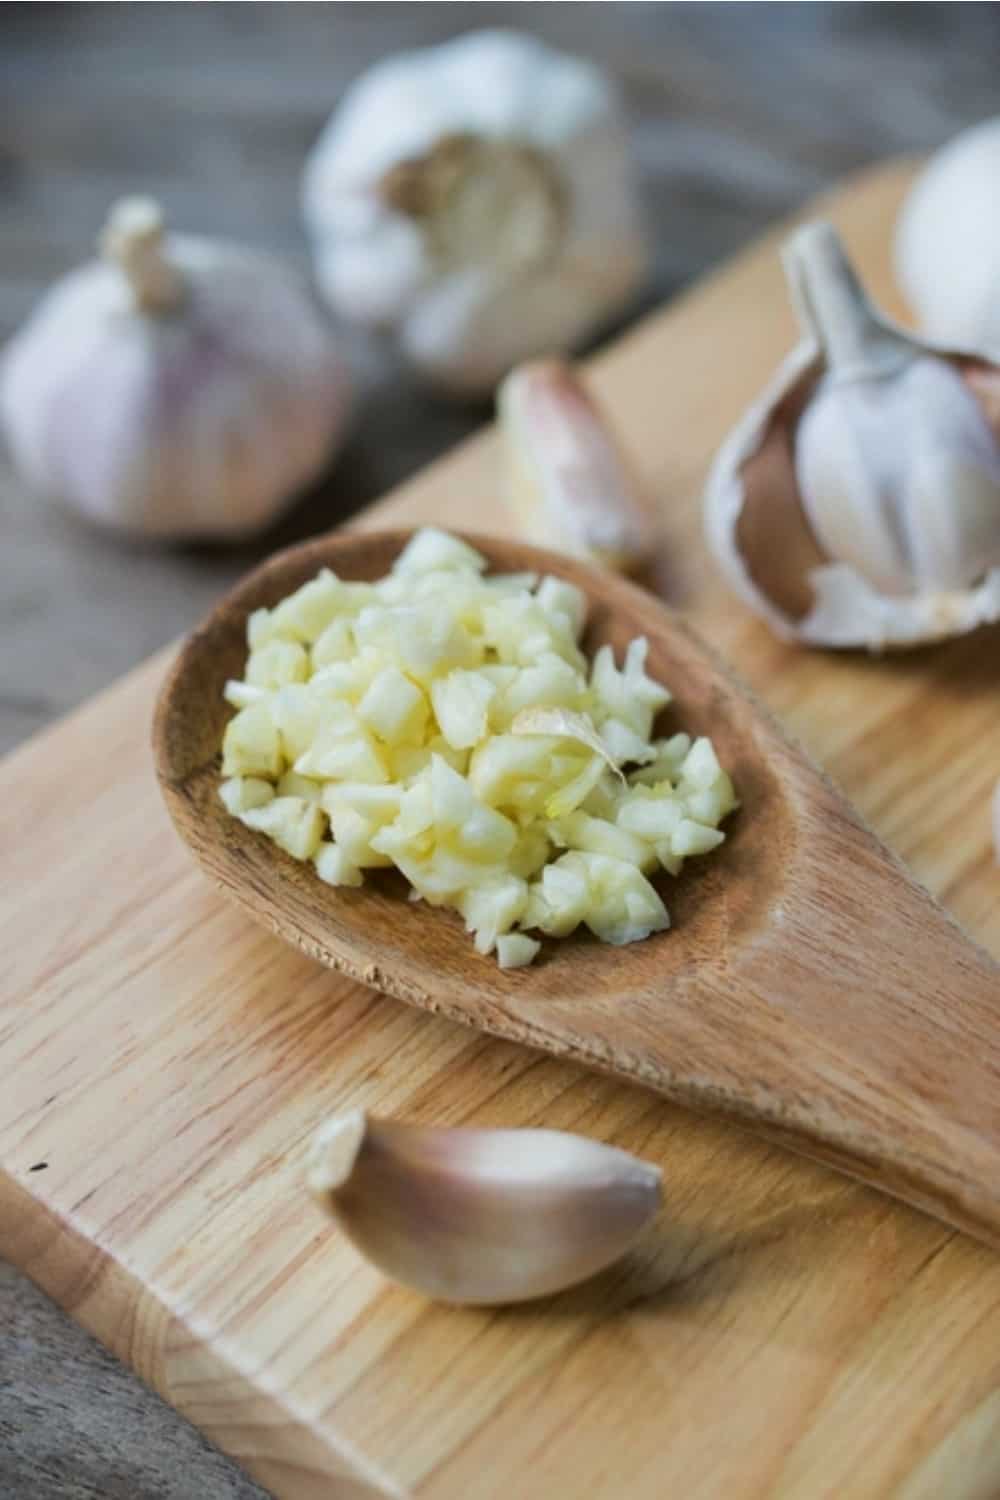 minced garlic with cloves